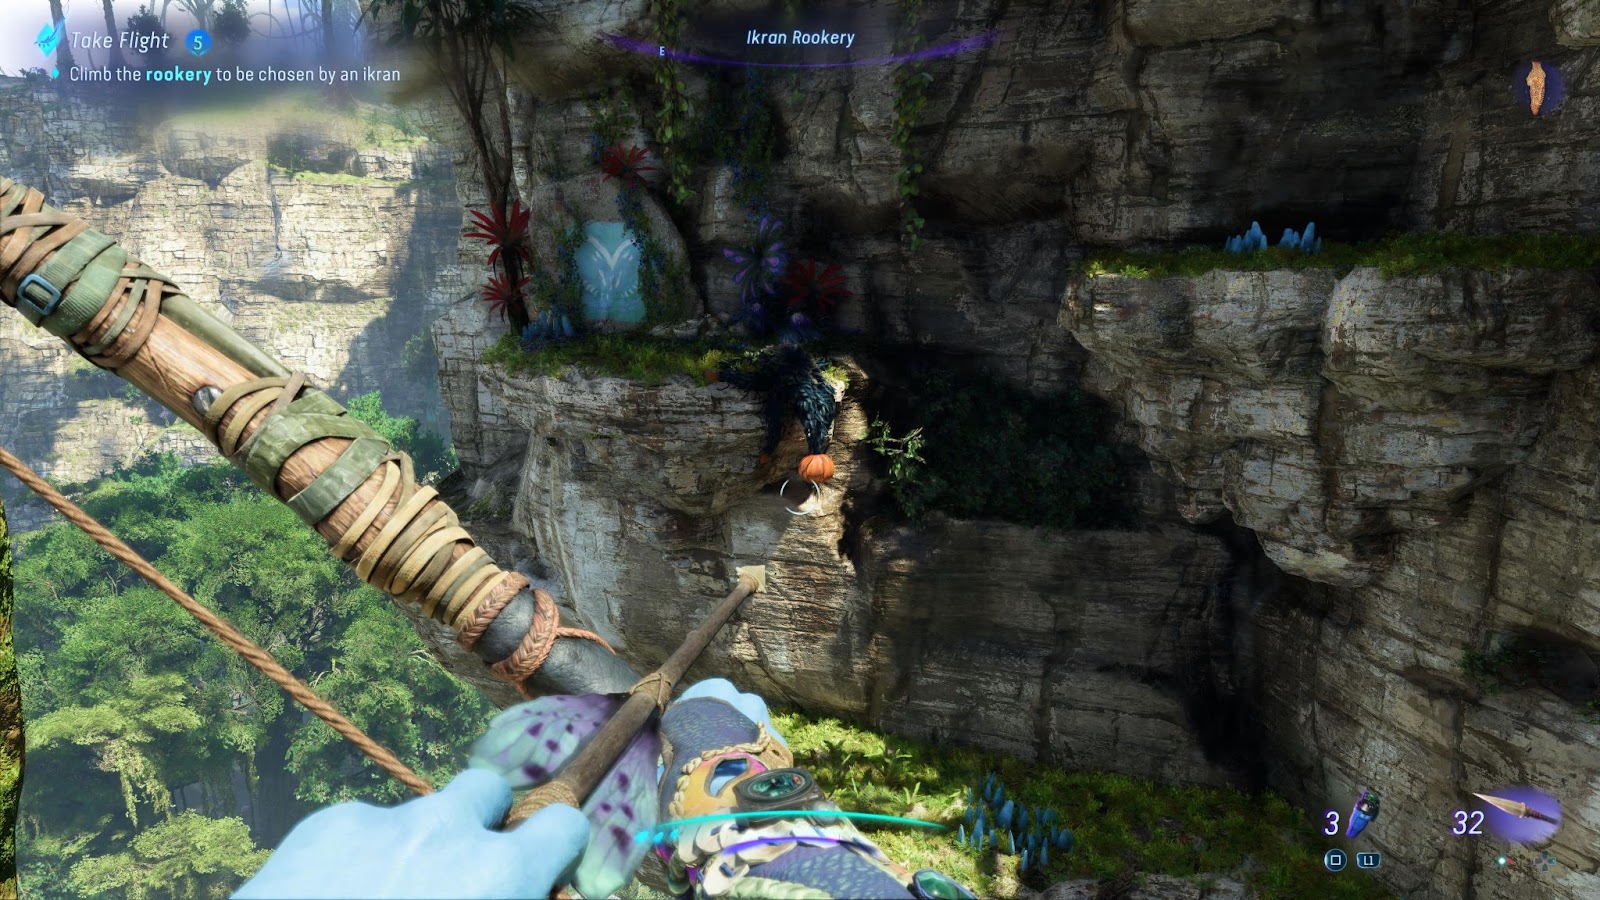 An in game screenshot of a Lift Vine pod in the rookery in Avatar: Frontiers of Pandora